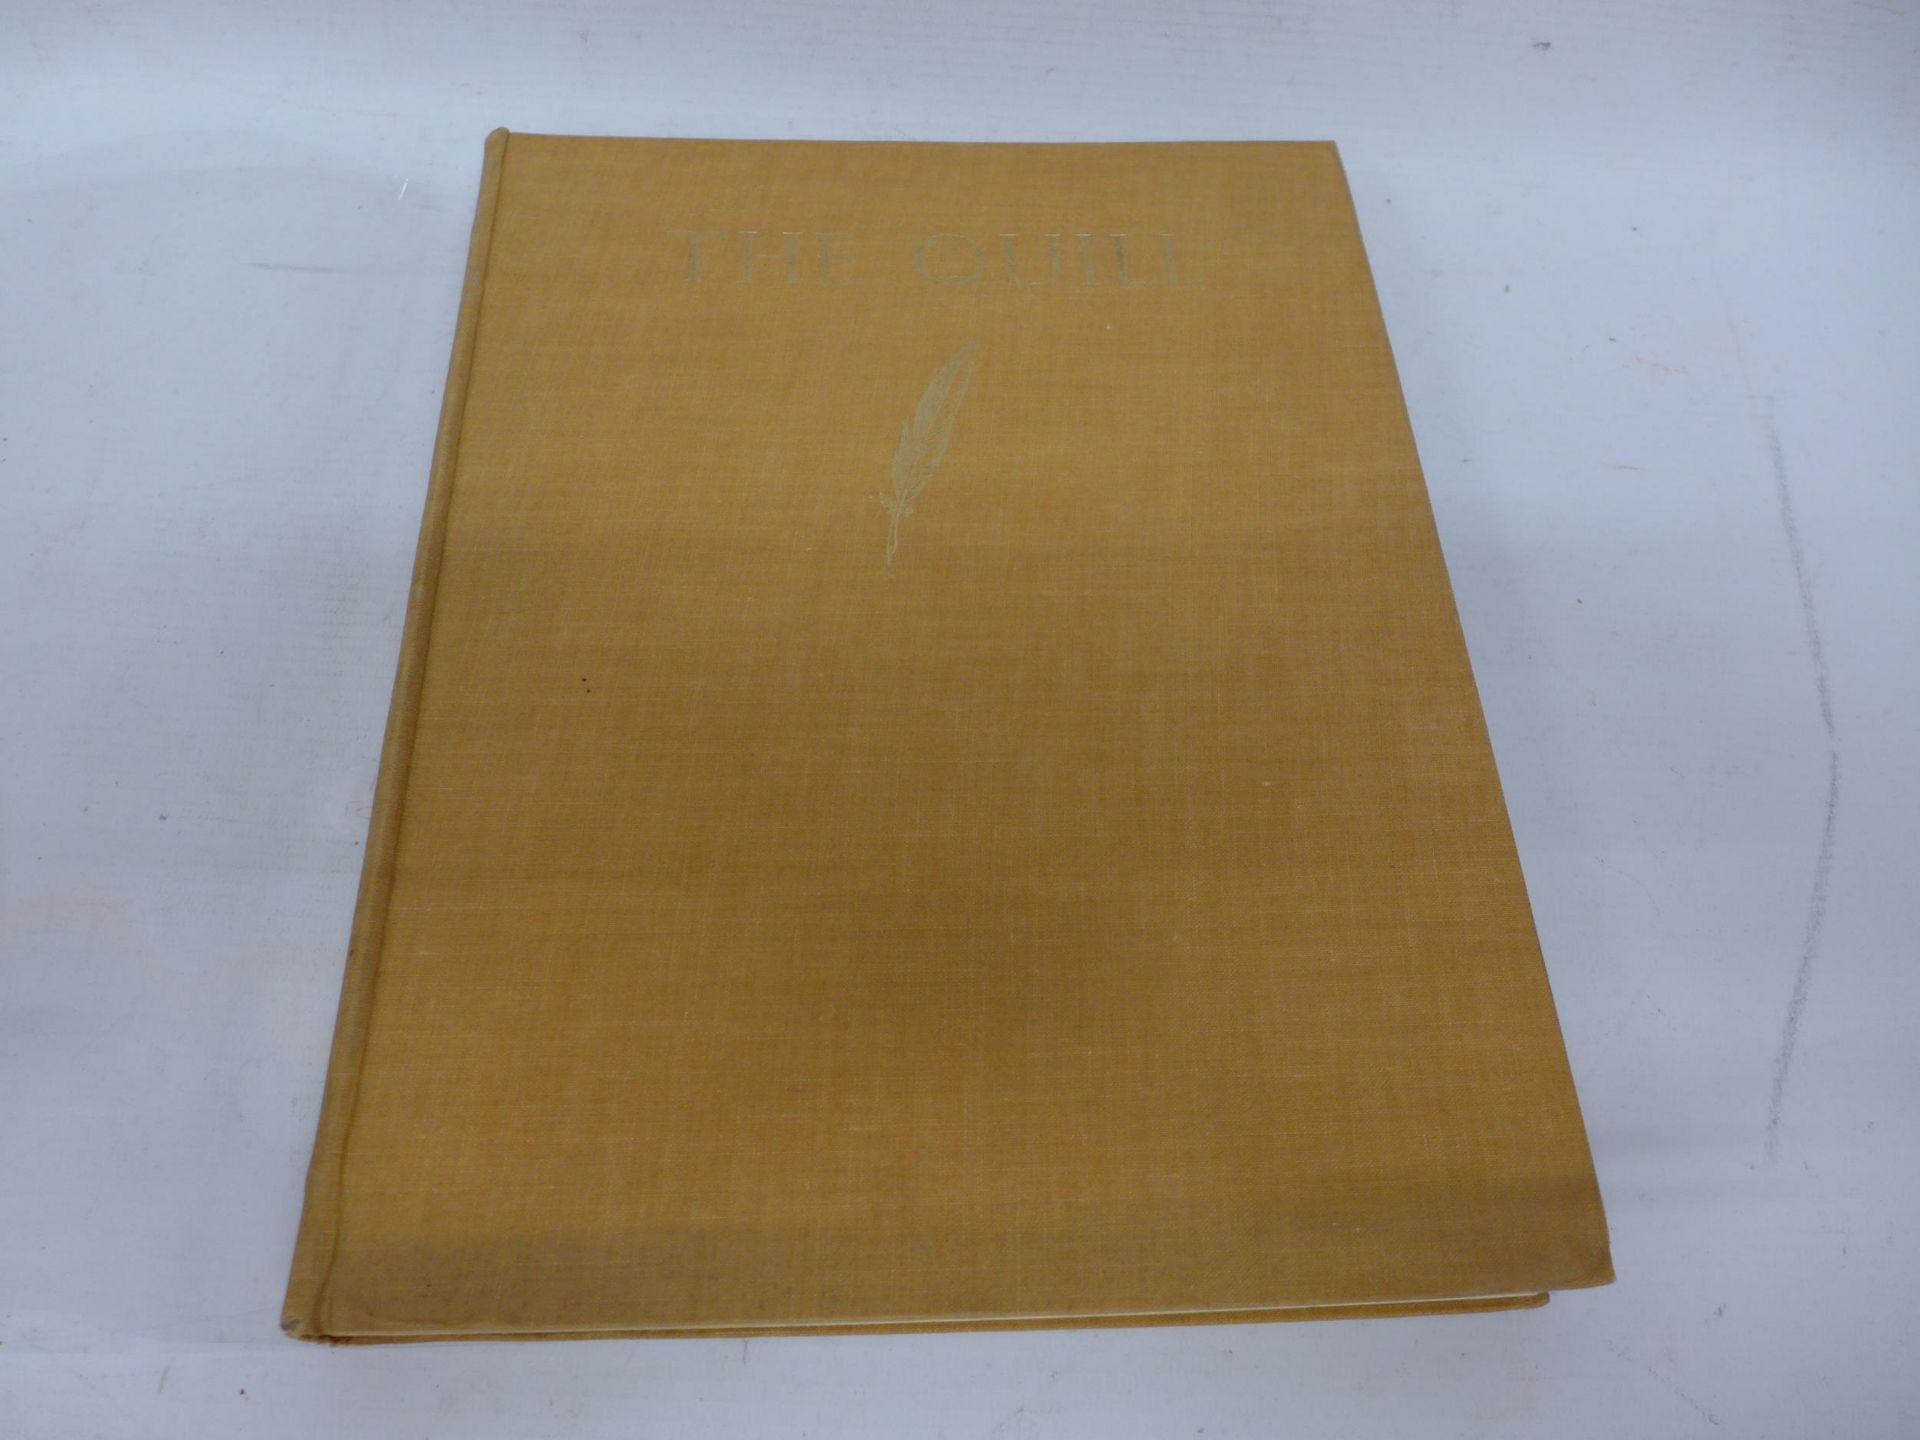 A SIGNED LIMITED EDITION 1044 OF 1750 COPIES 'THE QUILL' BY CAPTAIN E.G.C. BECKWITH, 1947